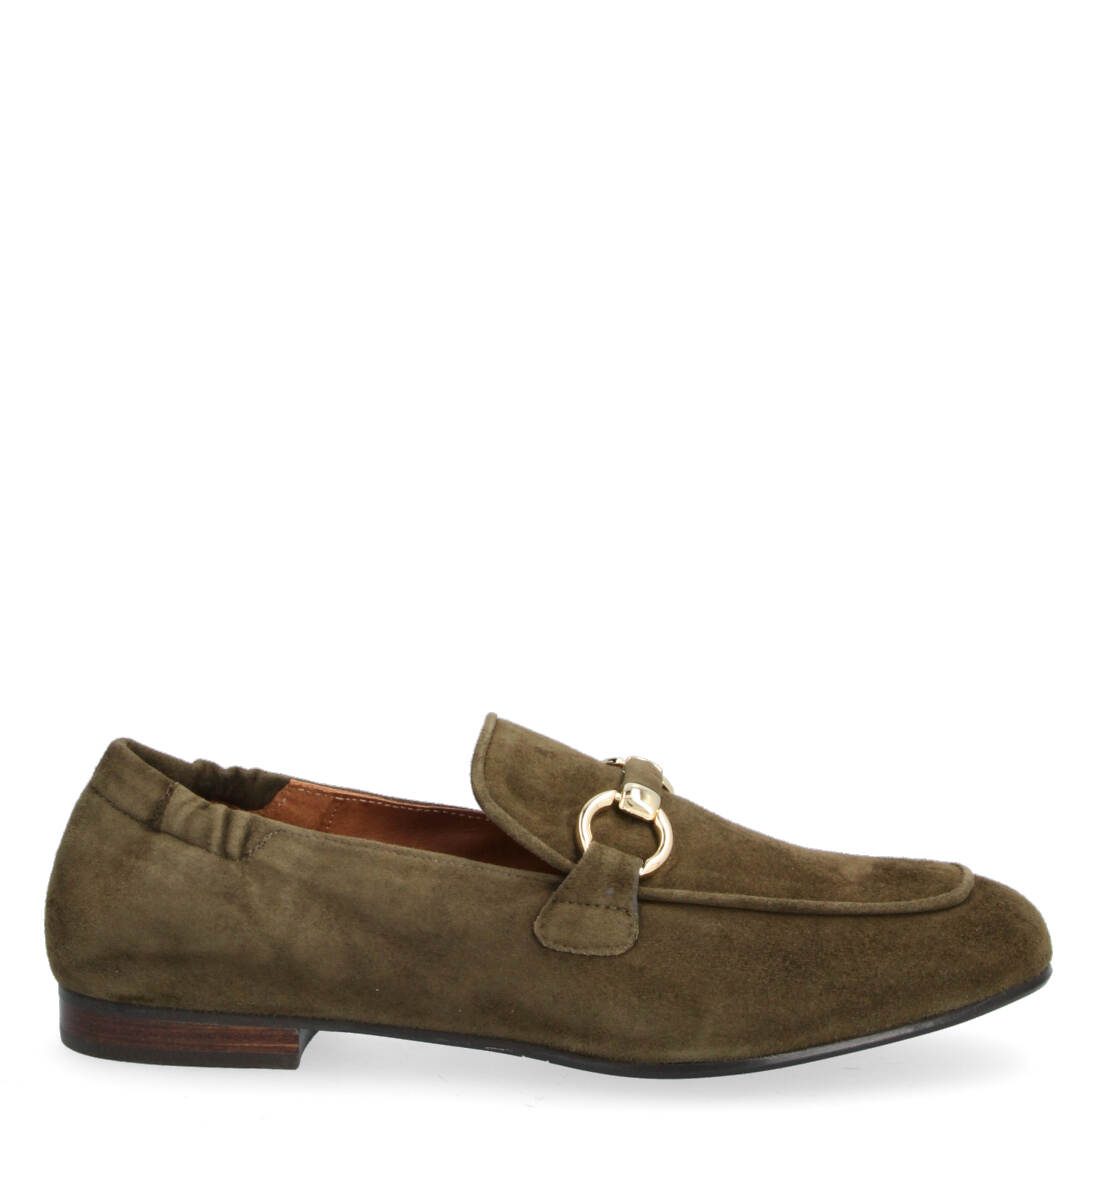 A1920 Loafers, Army Suede, 36